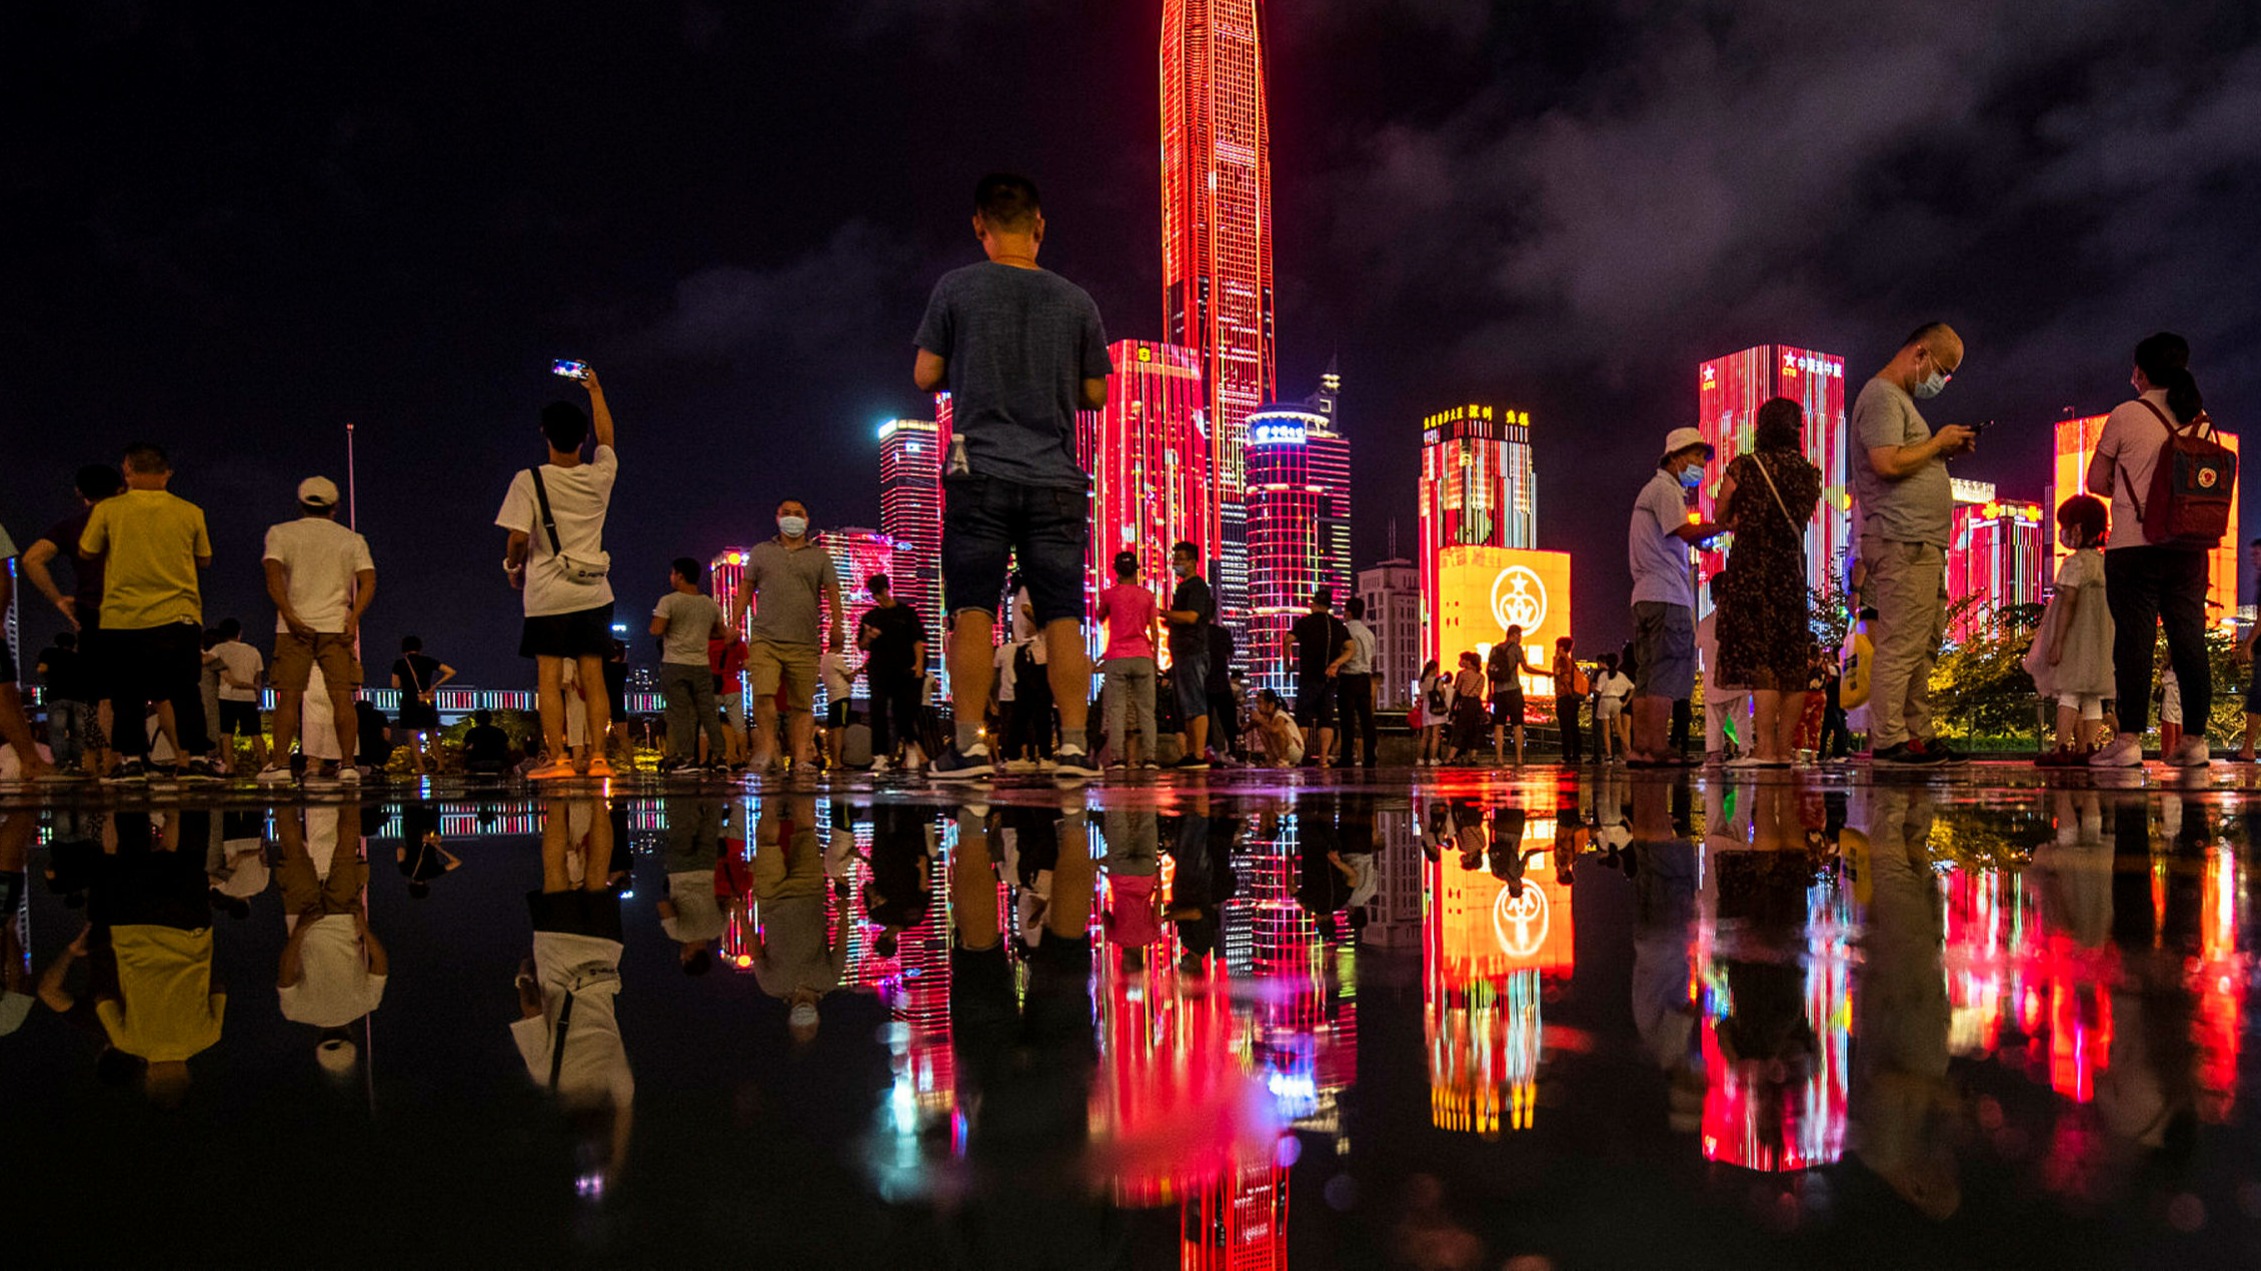 Which Chinese city has the best nightlife? - Quora